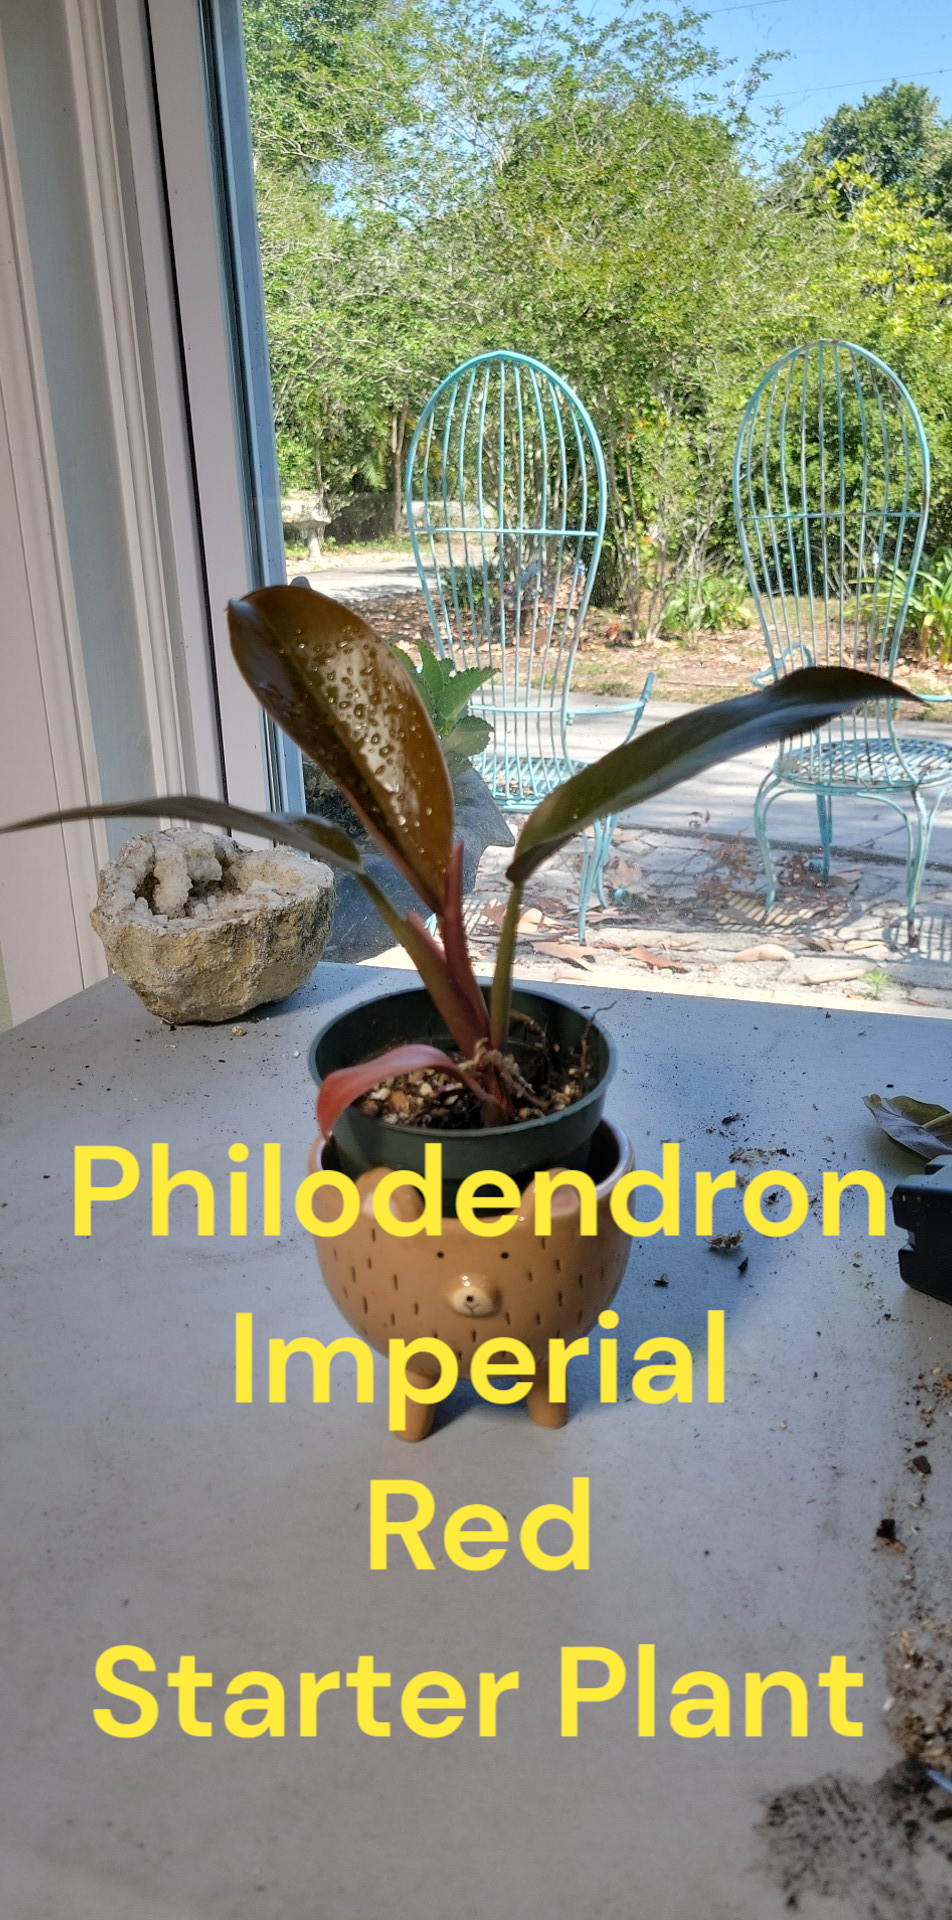 Philodendron Imperial Red Starter plants (2nd photo) Photos b4 Shipping